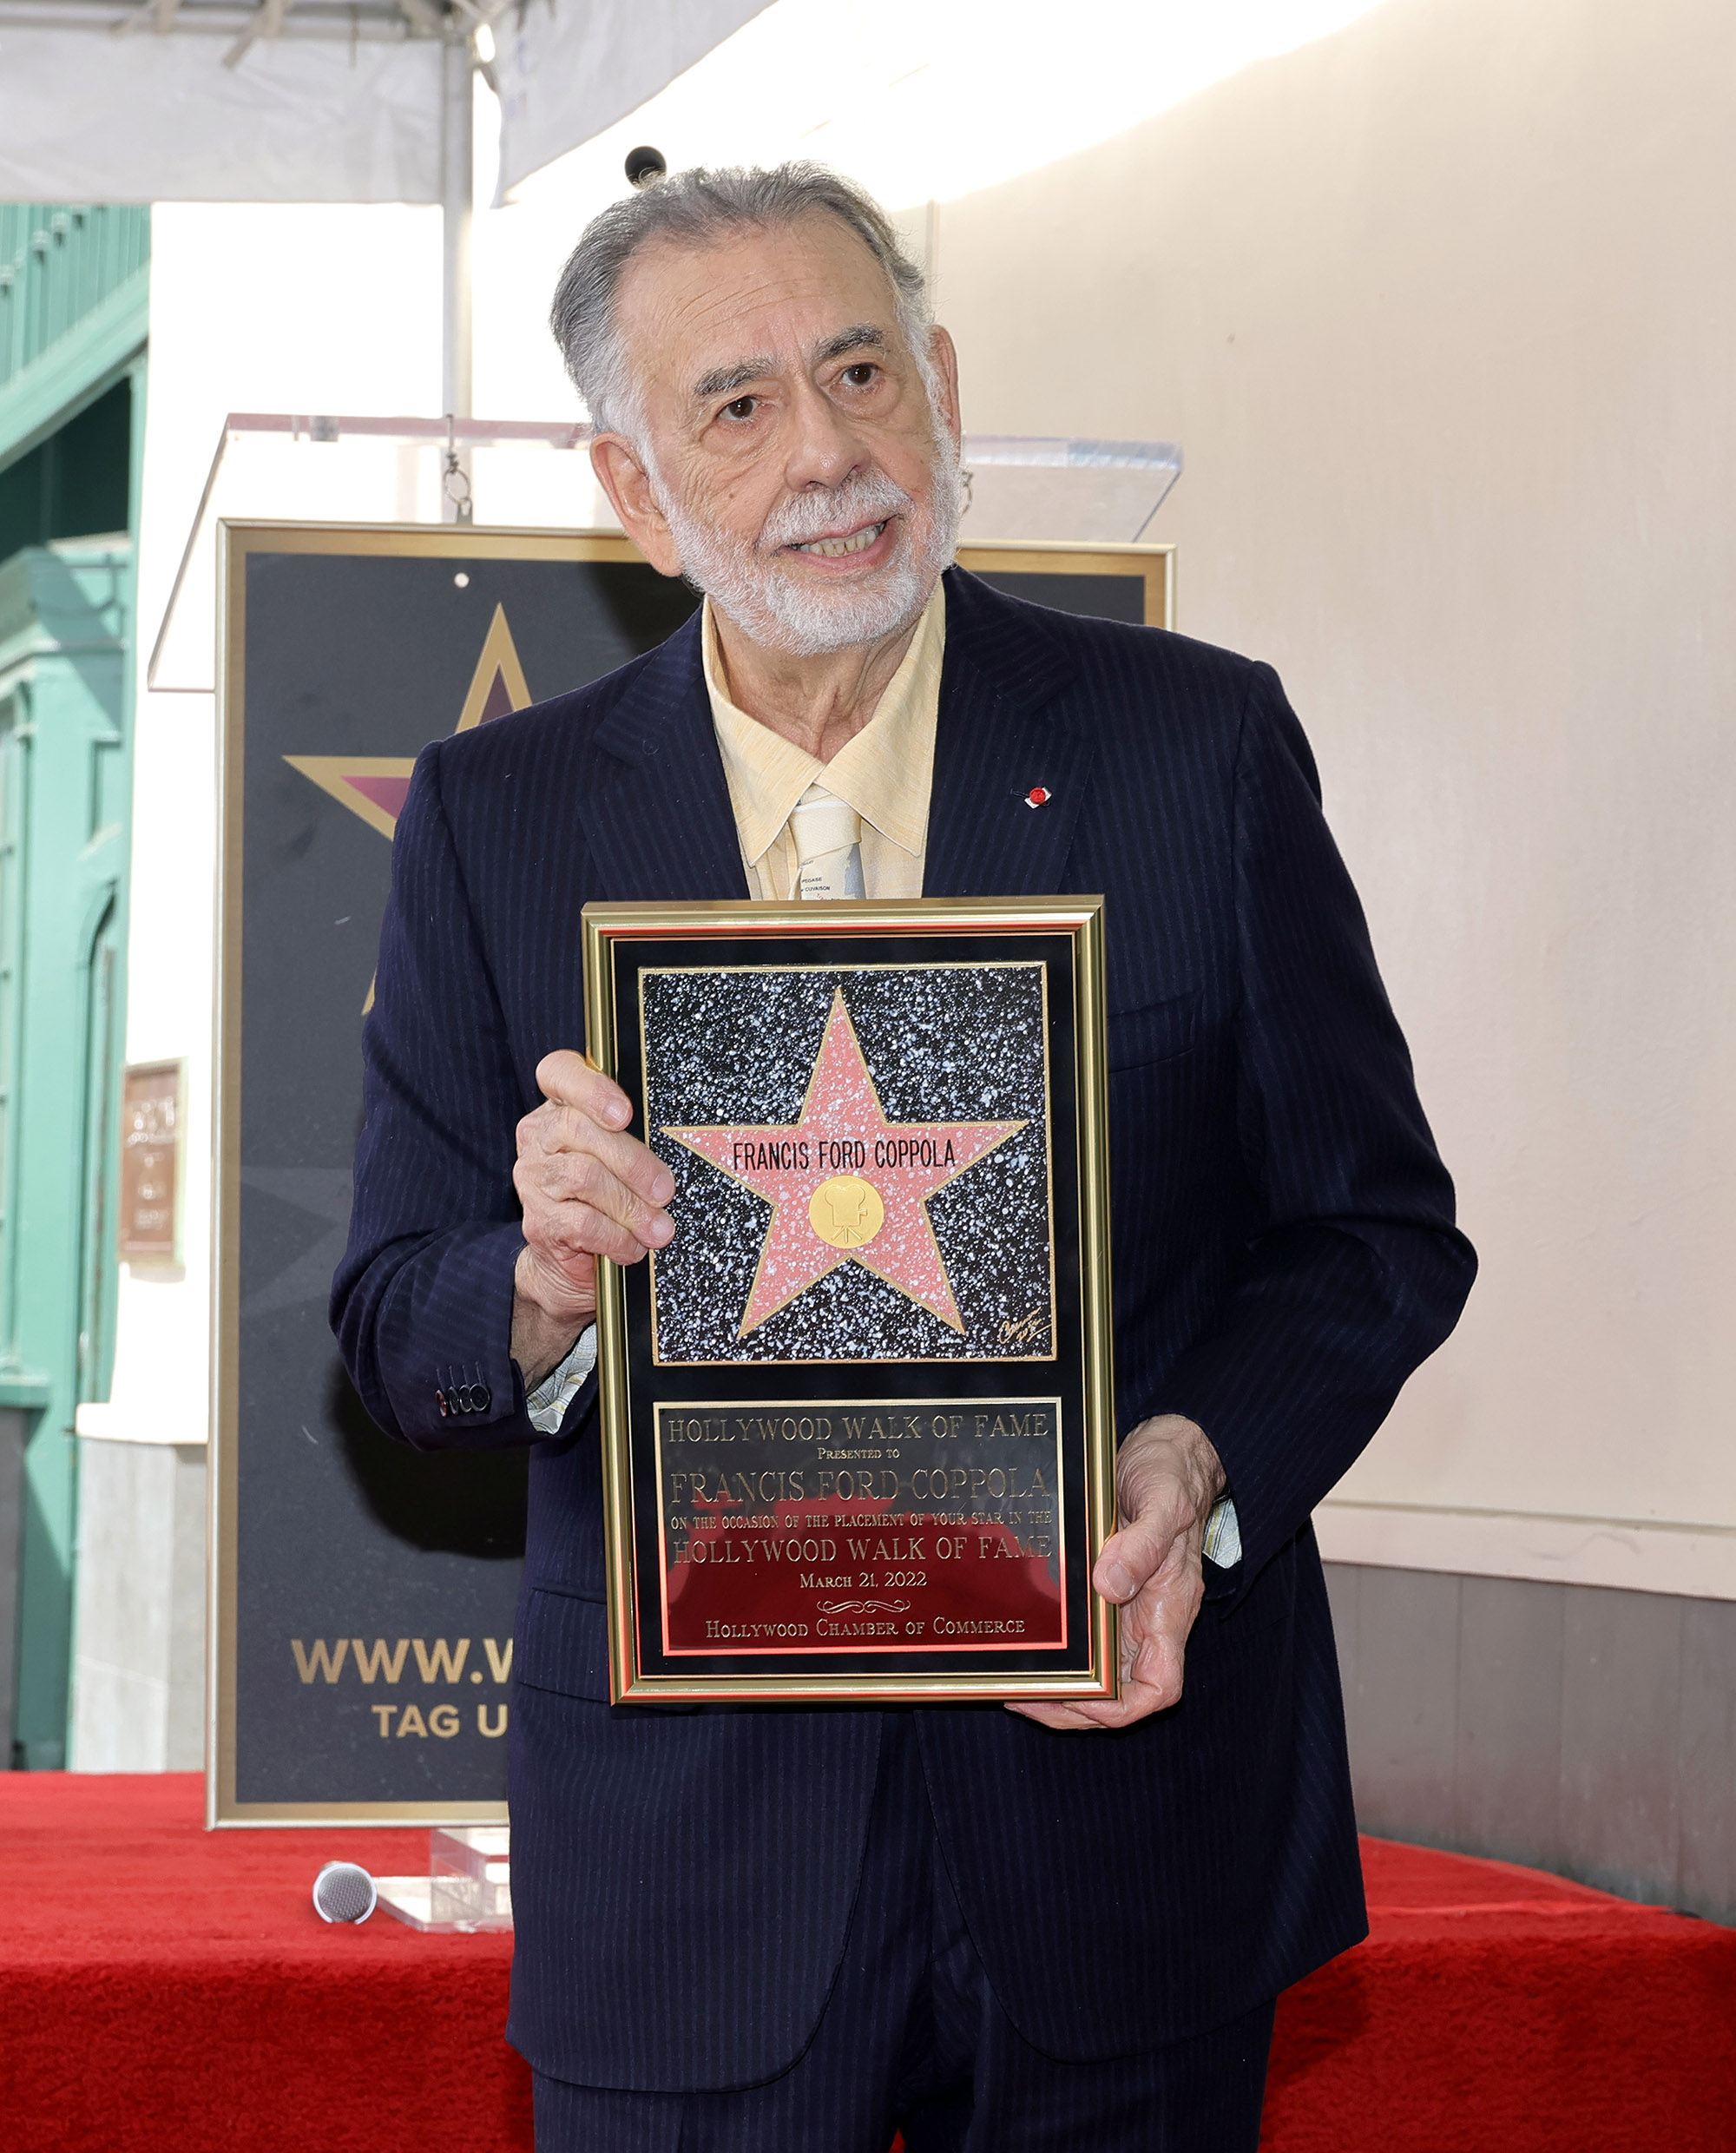 Francis Ford Coppola attends his Hollywood Walk of Fame Star Ceremony on March 21, 2022, in Hollywood, Calif. The director is known for many iconic films, including 